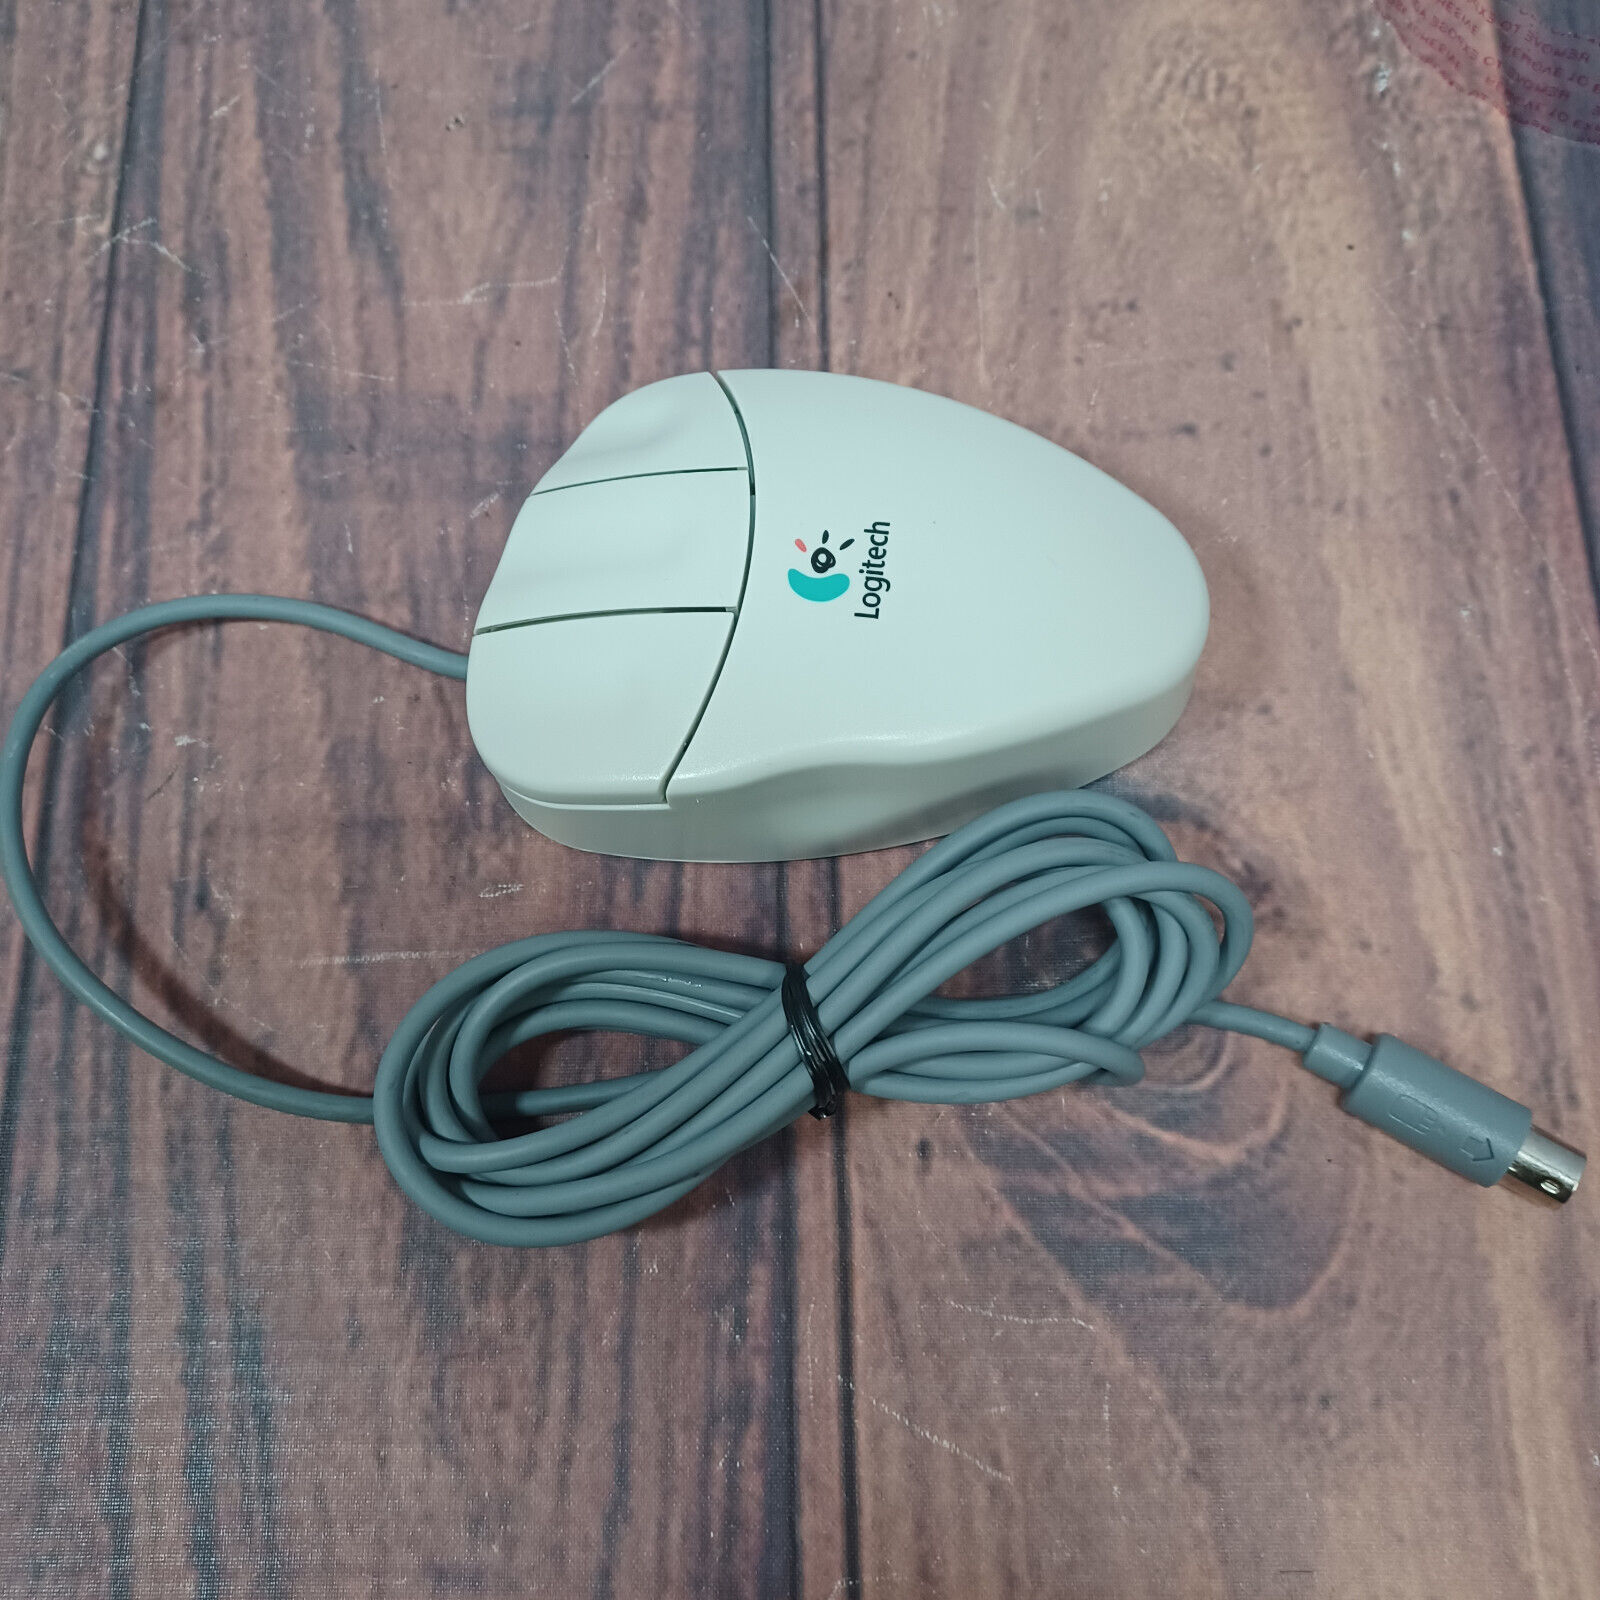 Logitech MouseMan Serial-MousePort M-CQ38 Ps/2 Wired Mouse ~TESTED~ Vintage Vgc